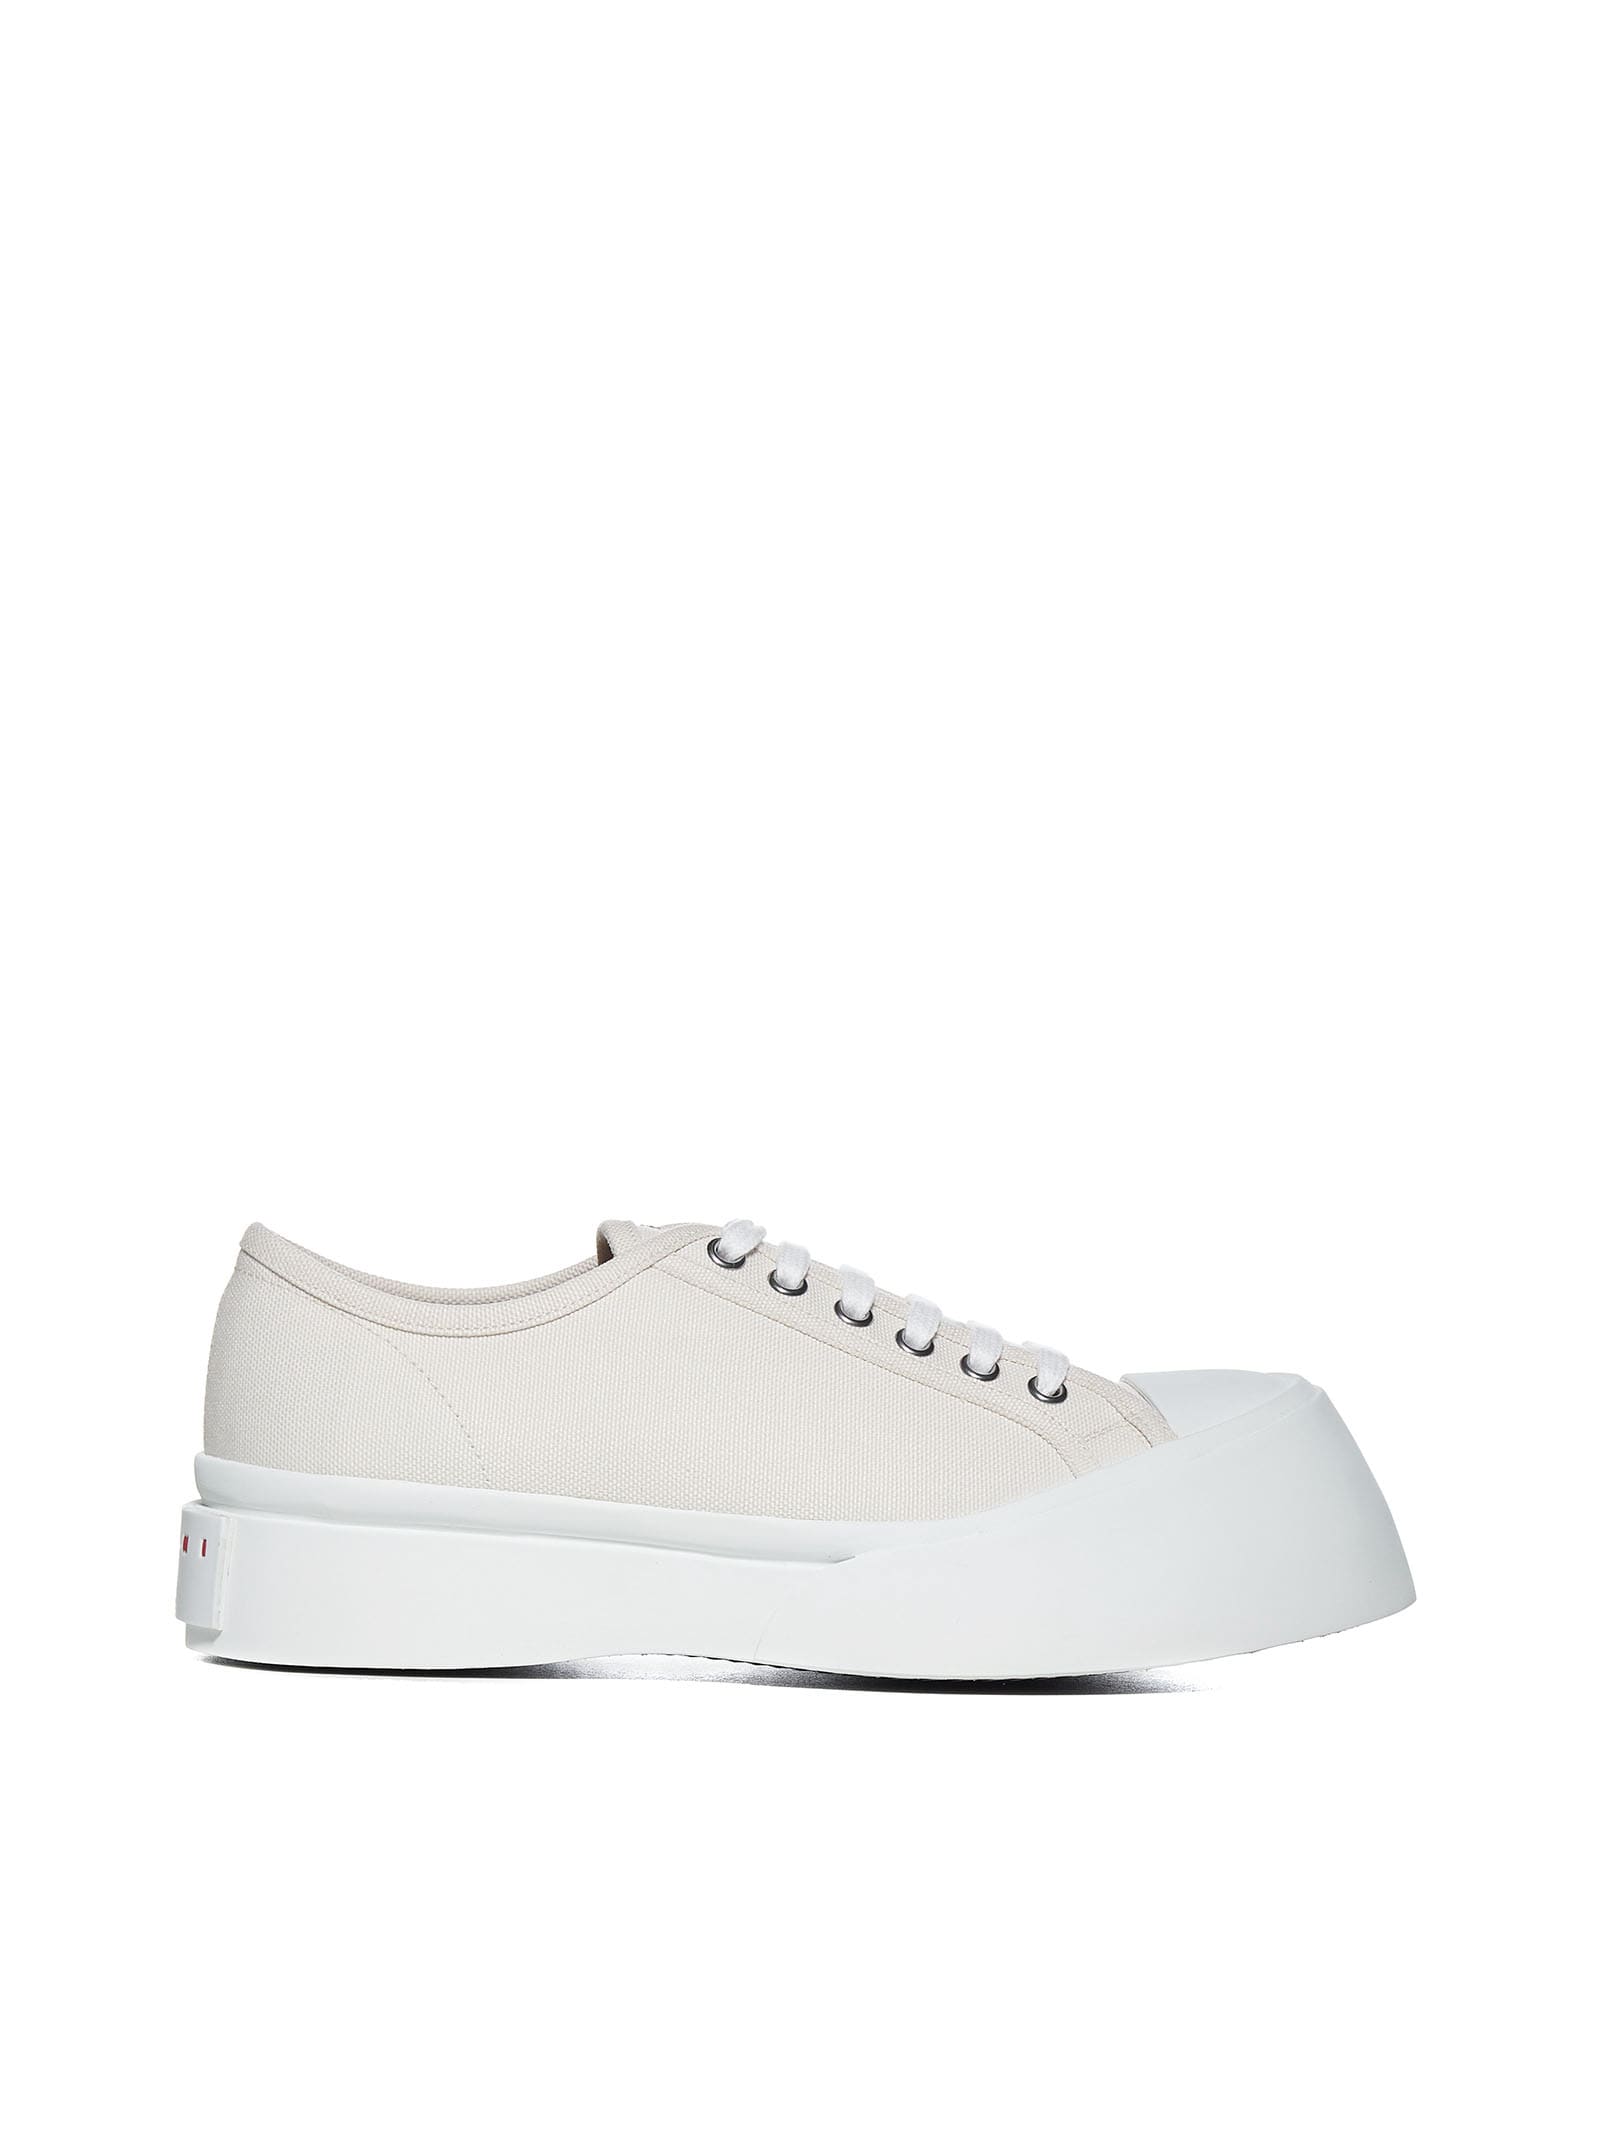 Buy Marni Sneakers online, shop Marni shoes with free shipping